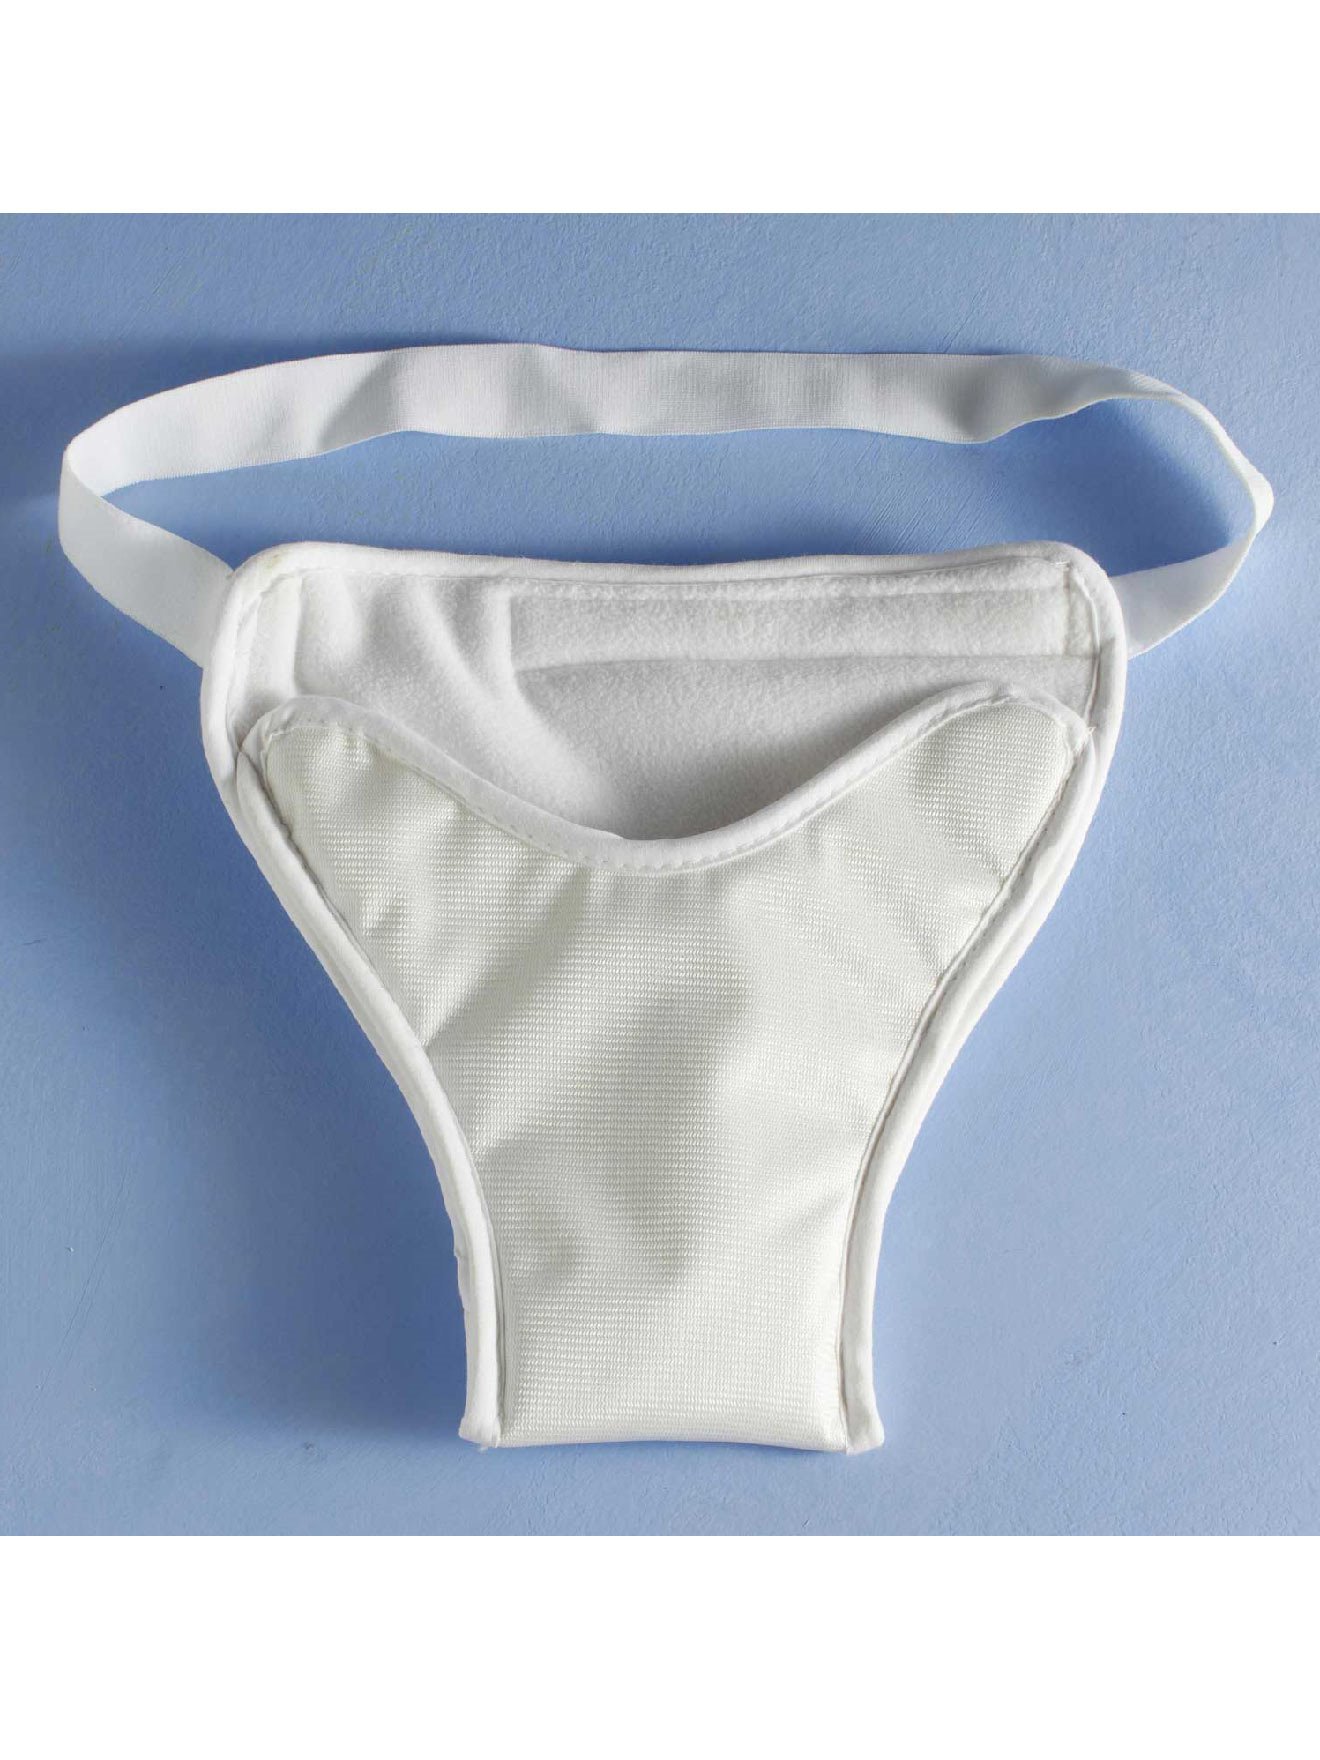 culotte incontinence homme